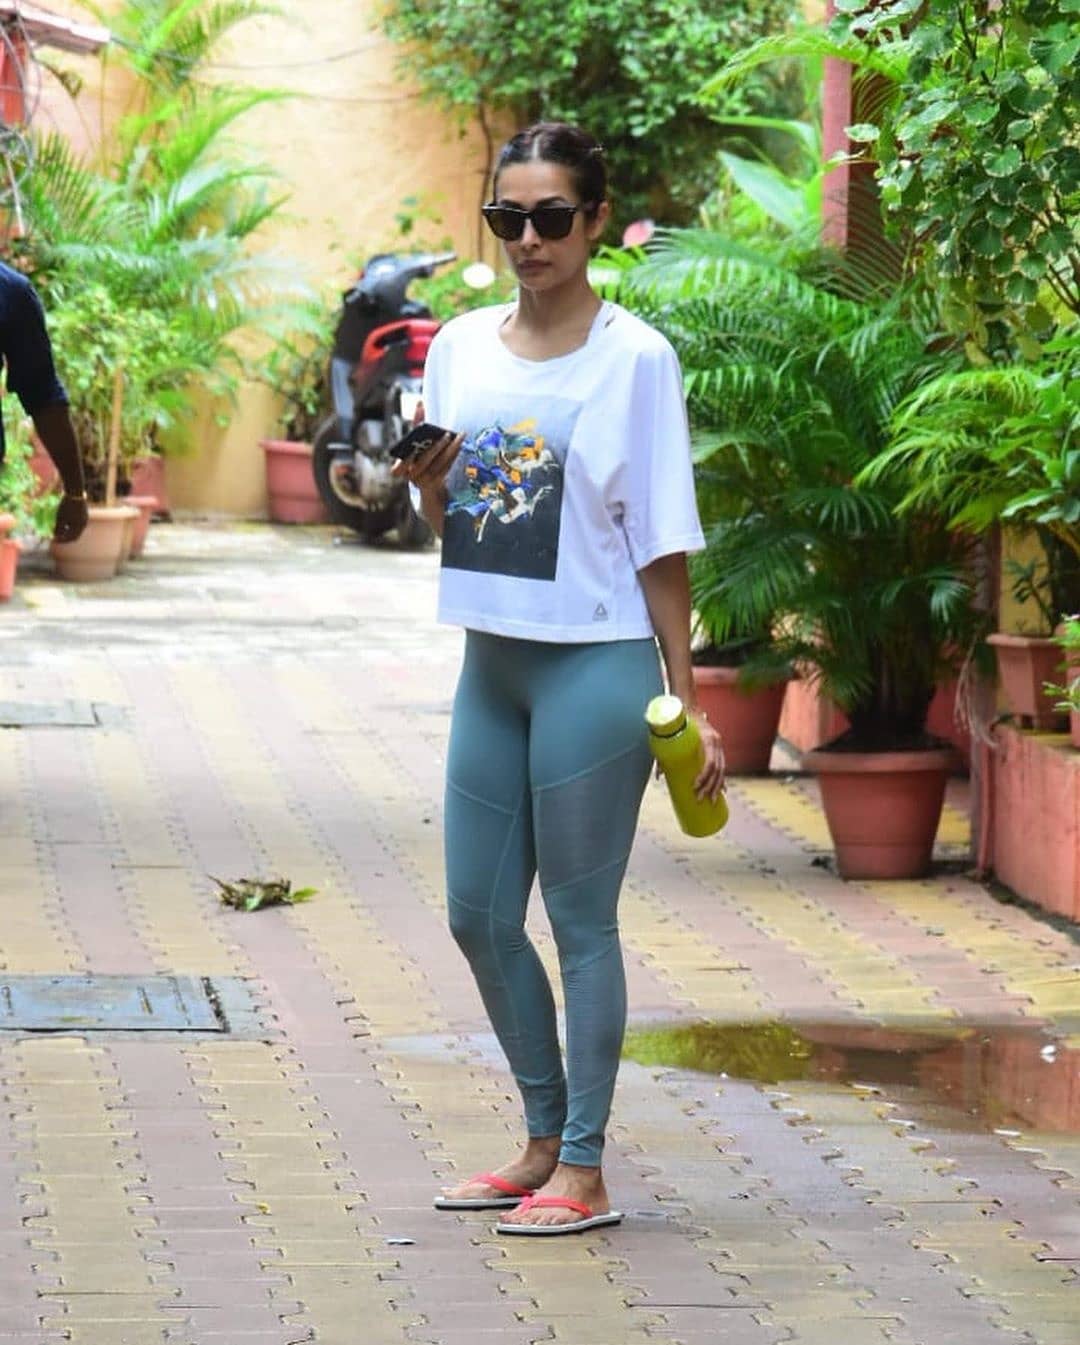 Young Fan Of Malaika Arora Elated To Get Her Autograph Outside Yoga Sudio